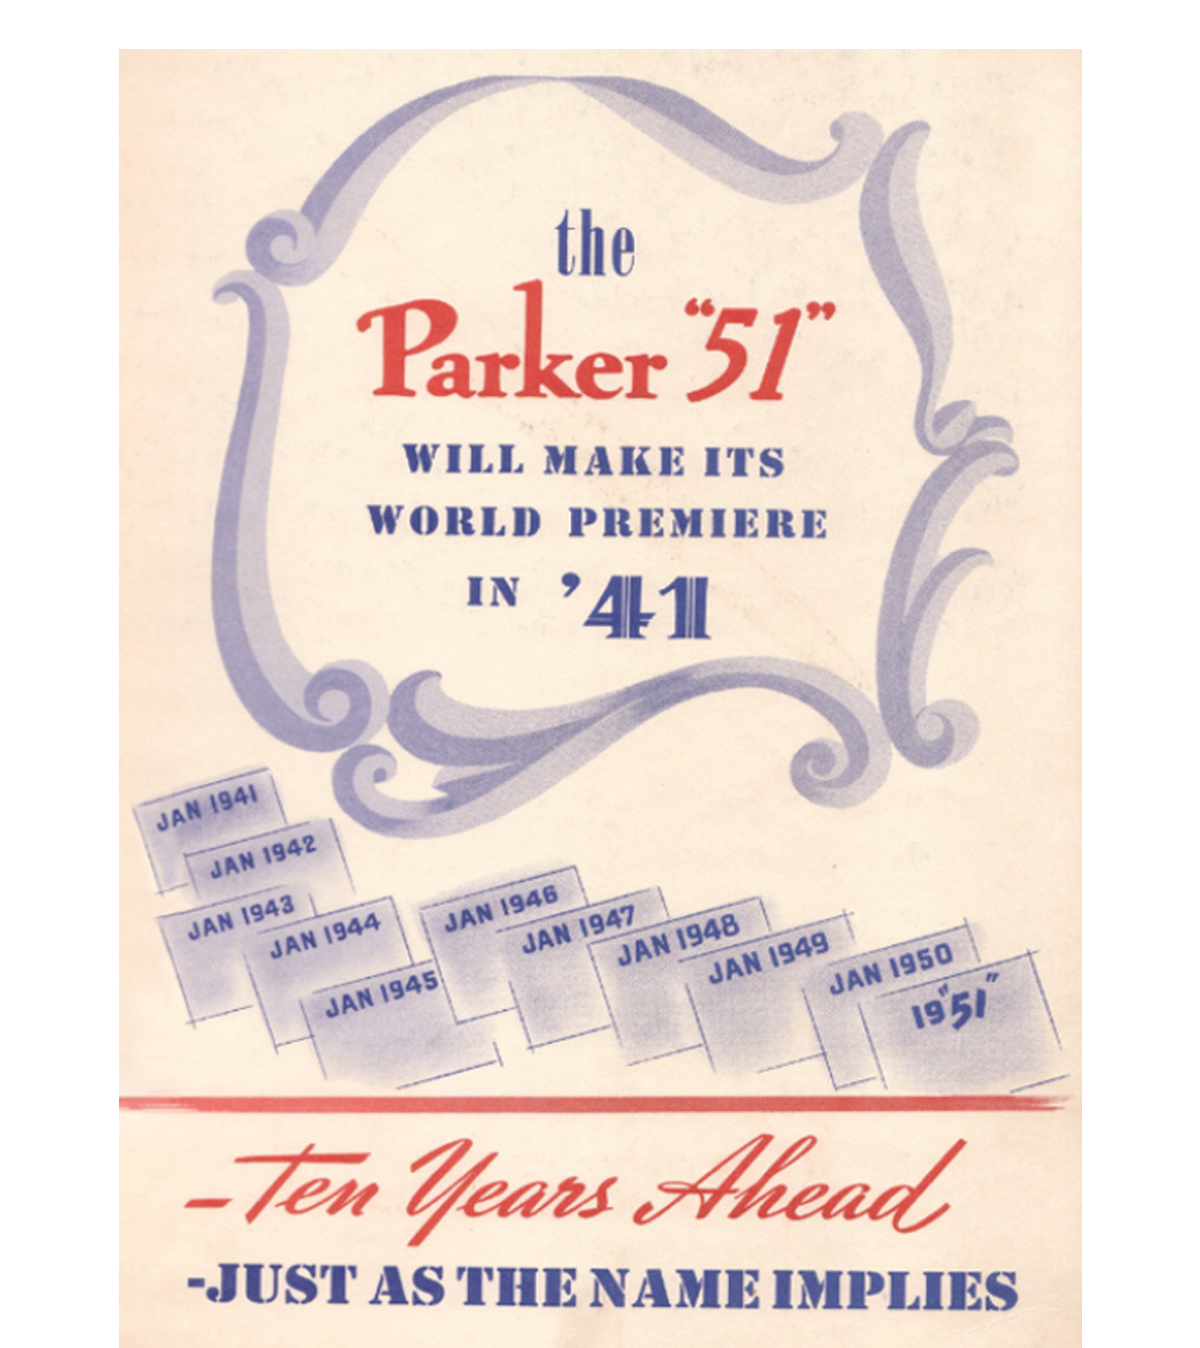 A vintage advertisement for a Parker 51 with slogan "ten years ahead, just as the name implies."